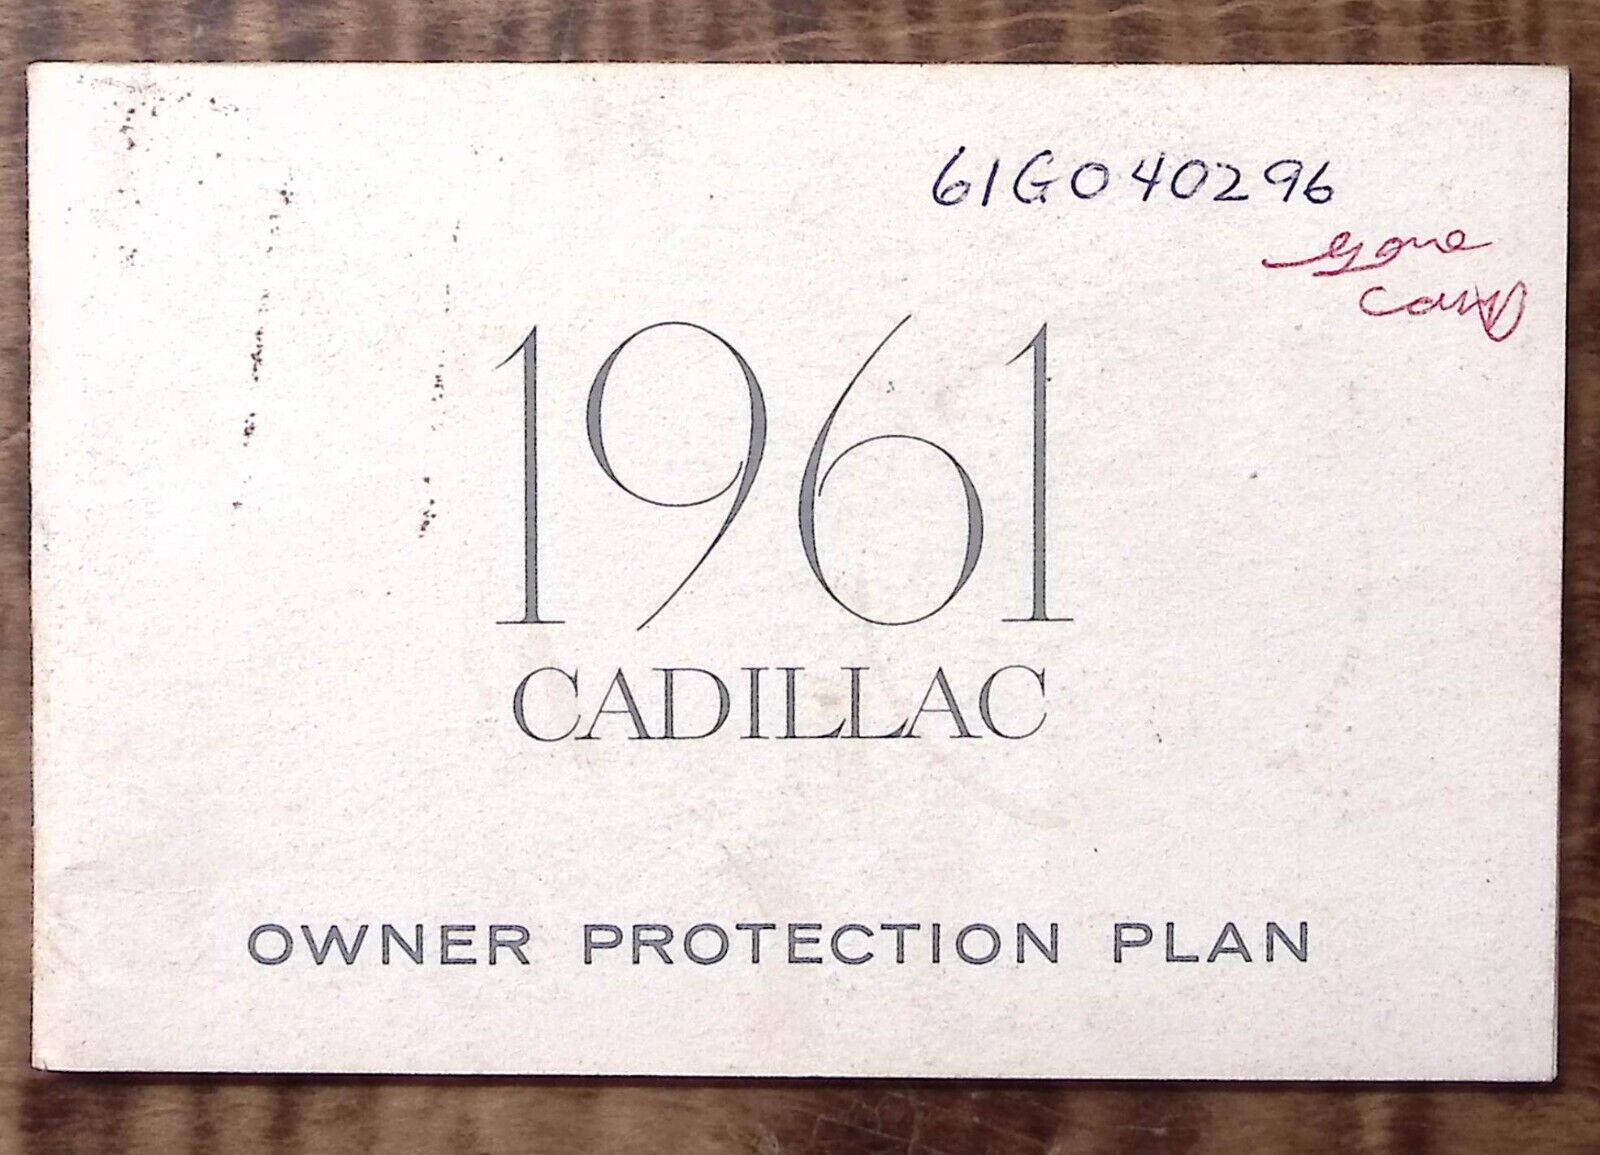 1961 CADILLAC OWNER PROTECTION PLAN BOOKLET 52 PAGES MAINTENANCE LOG BOOK Z5174